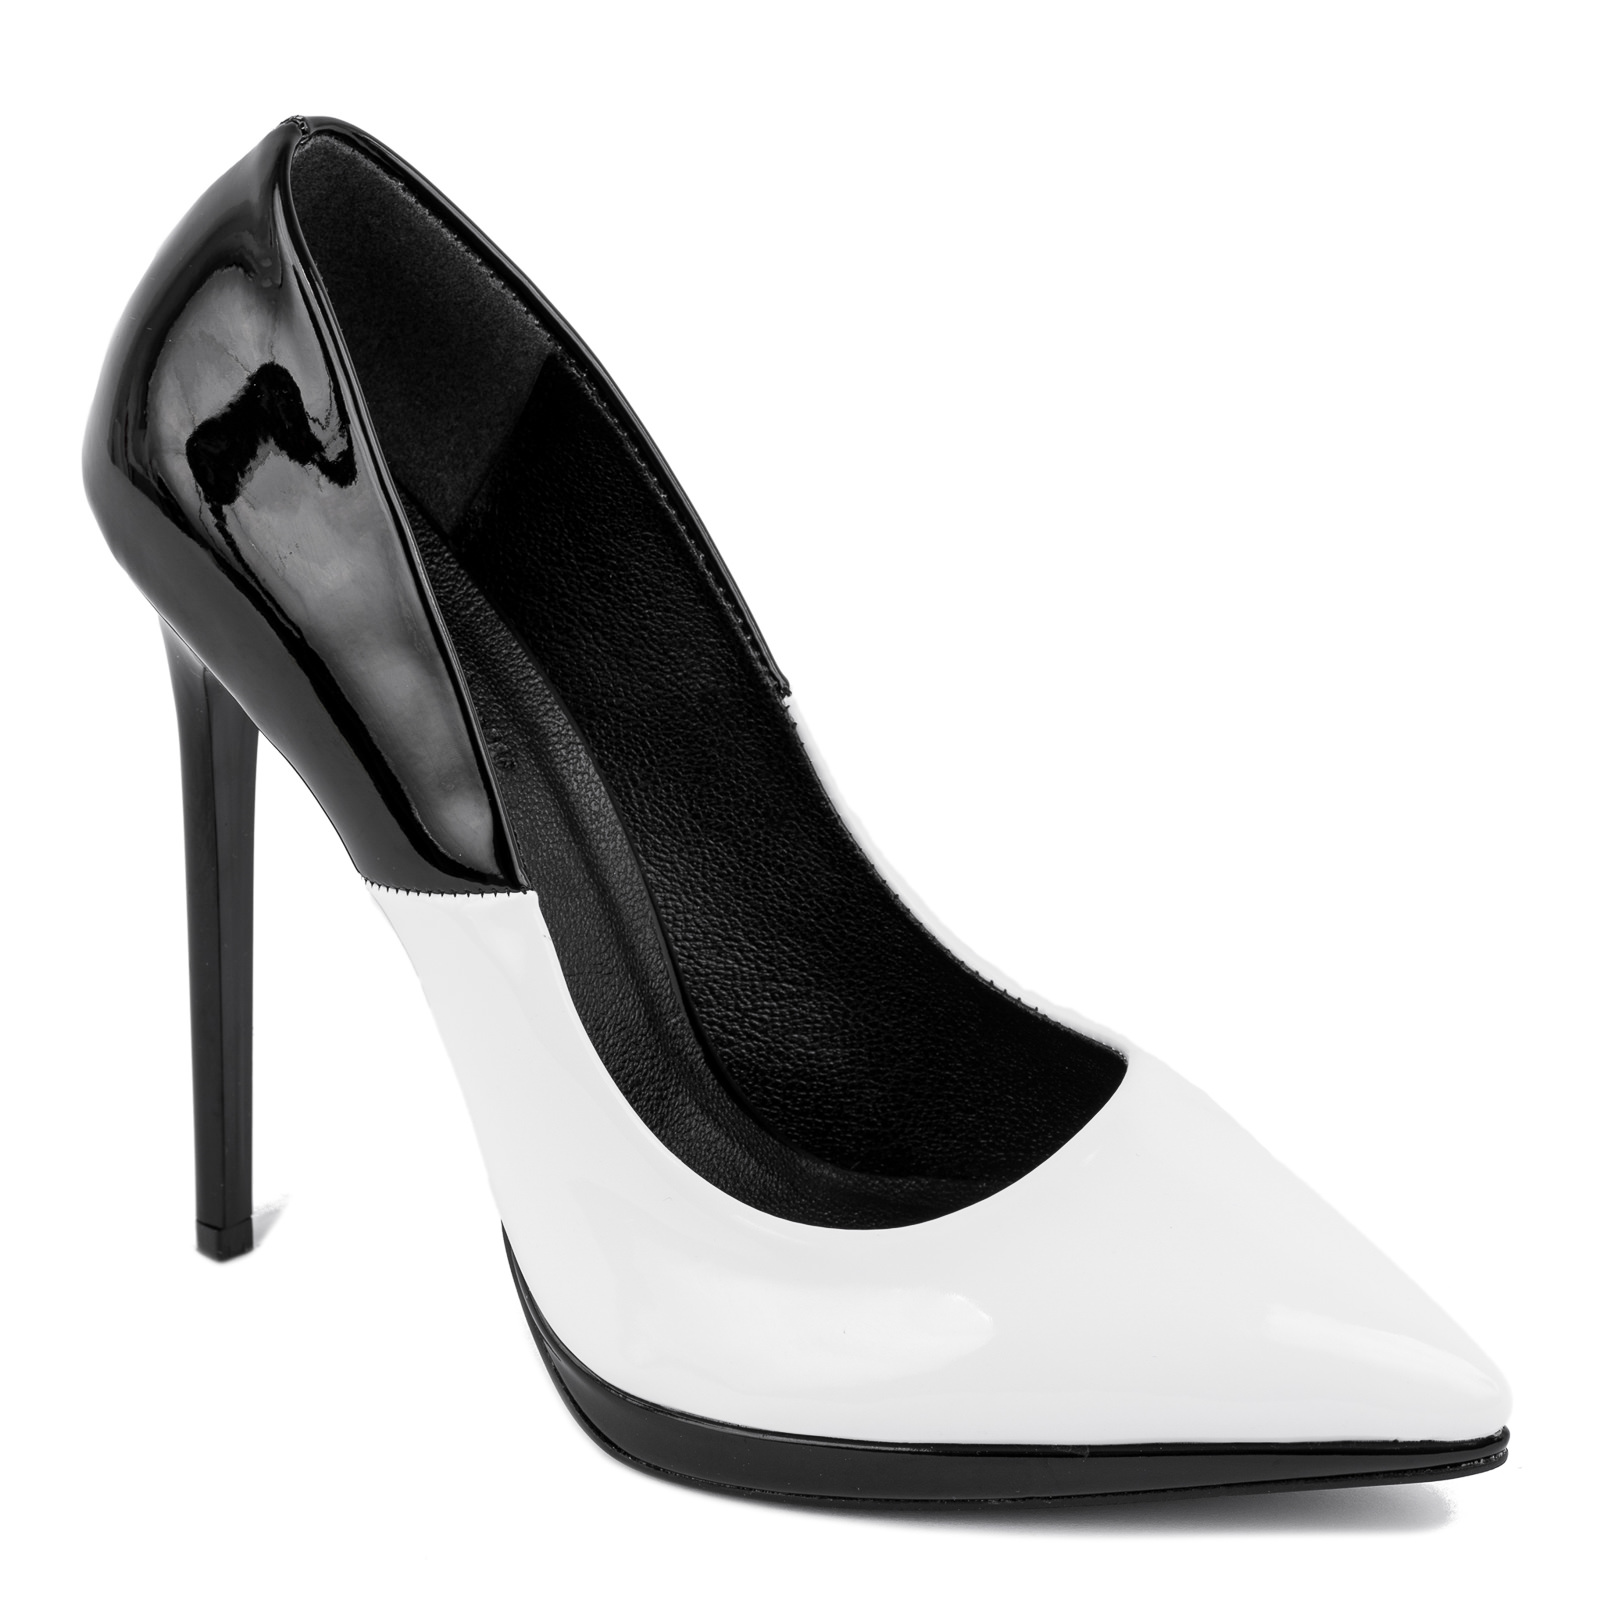 PATENT STILETTO SHOES WITH THIN HEEL - BLACK/WHITE